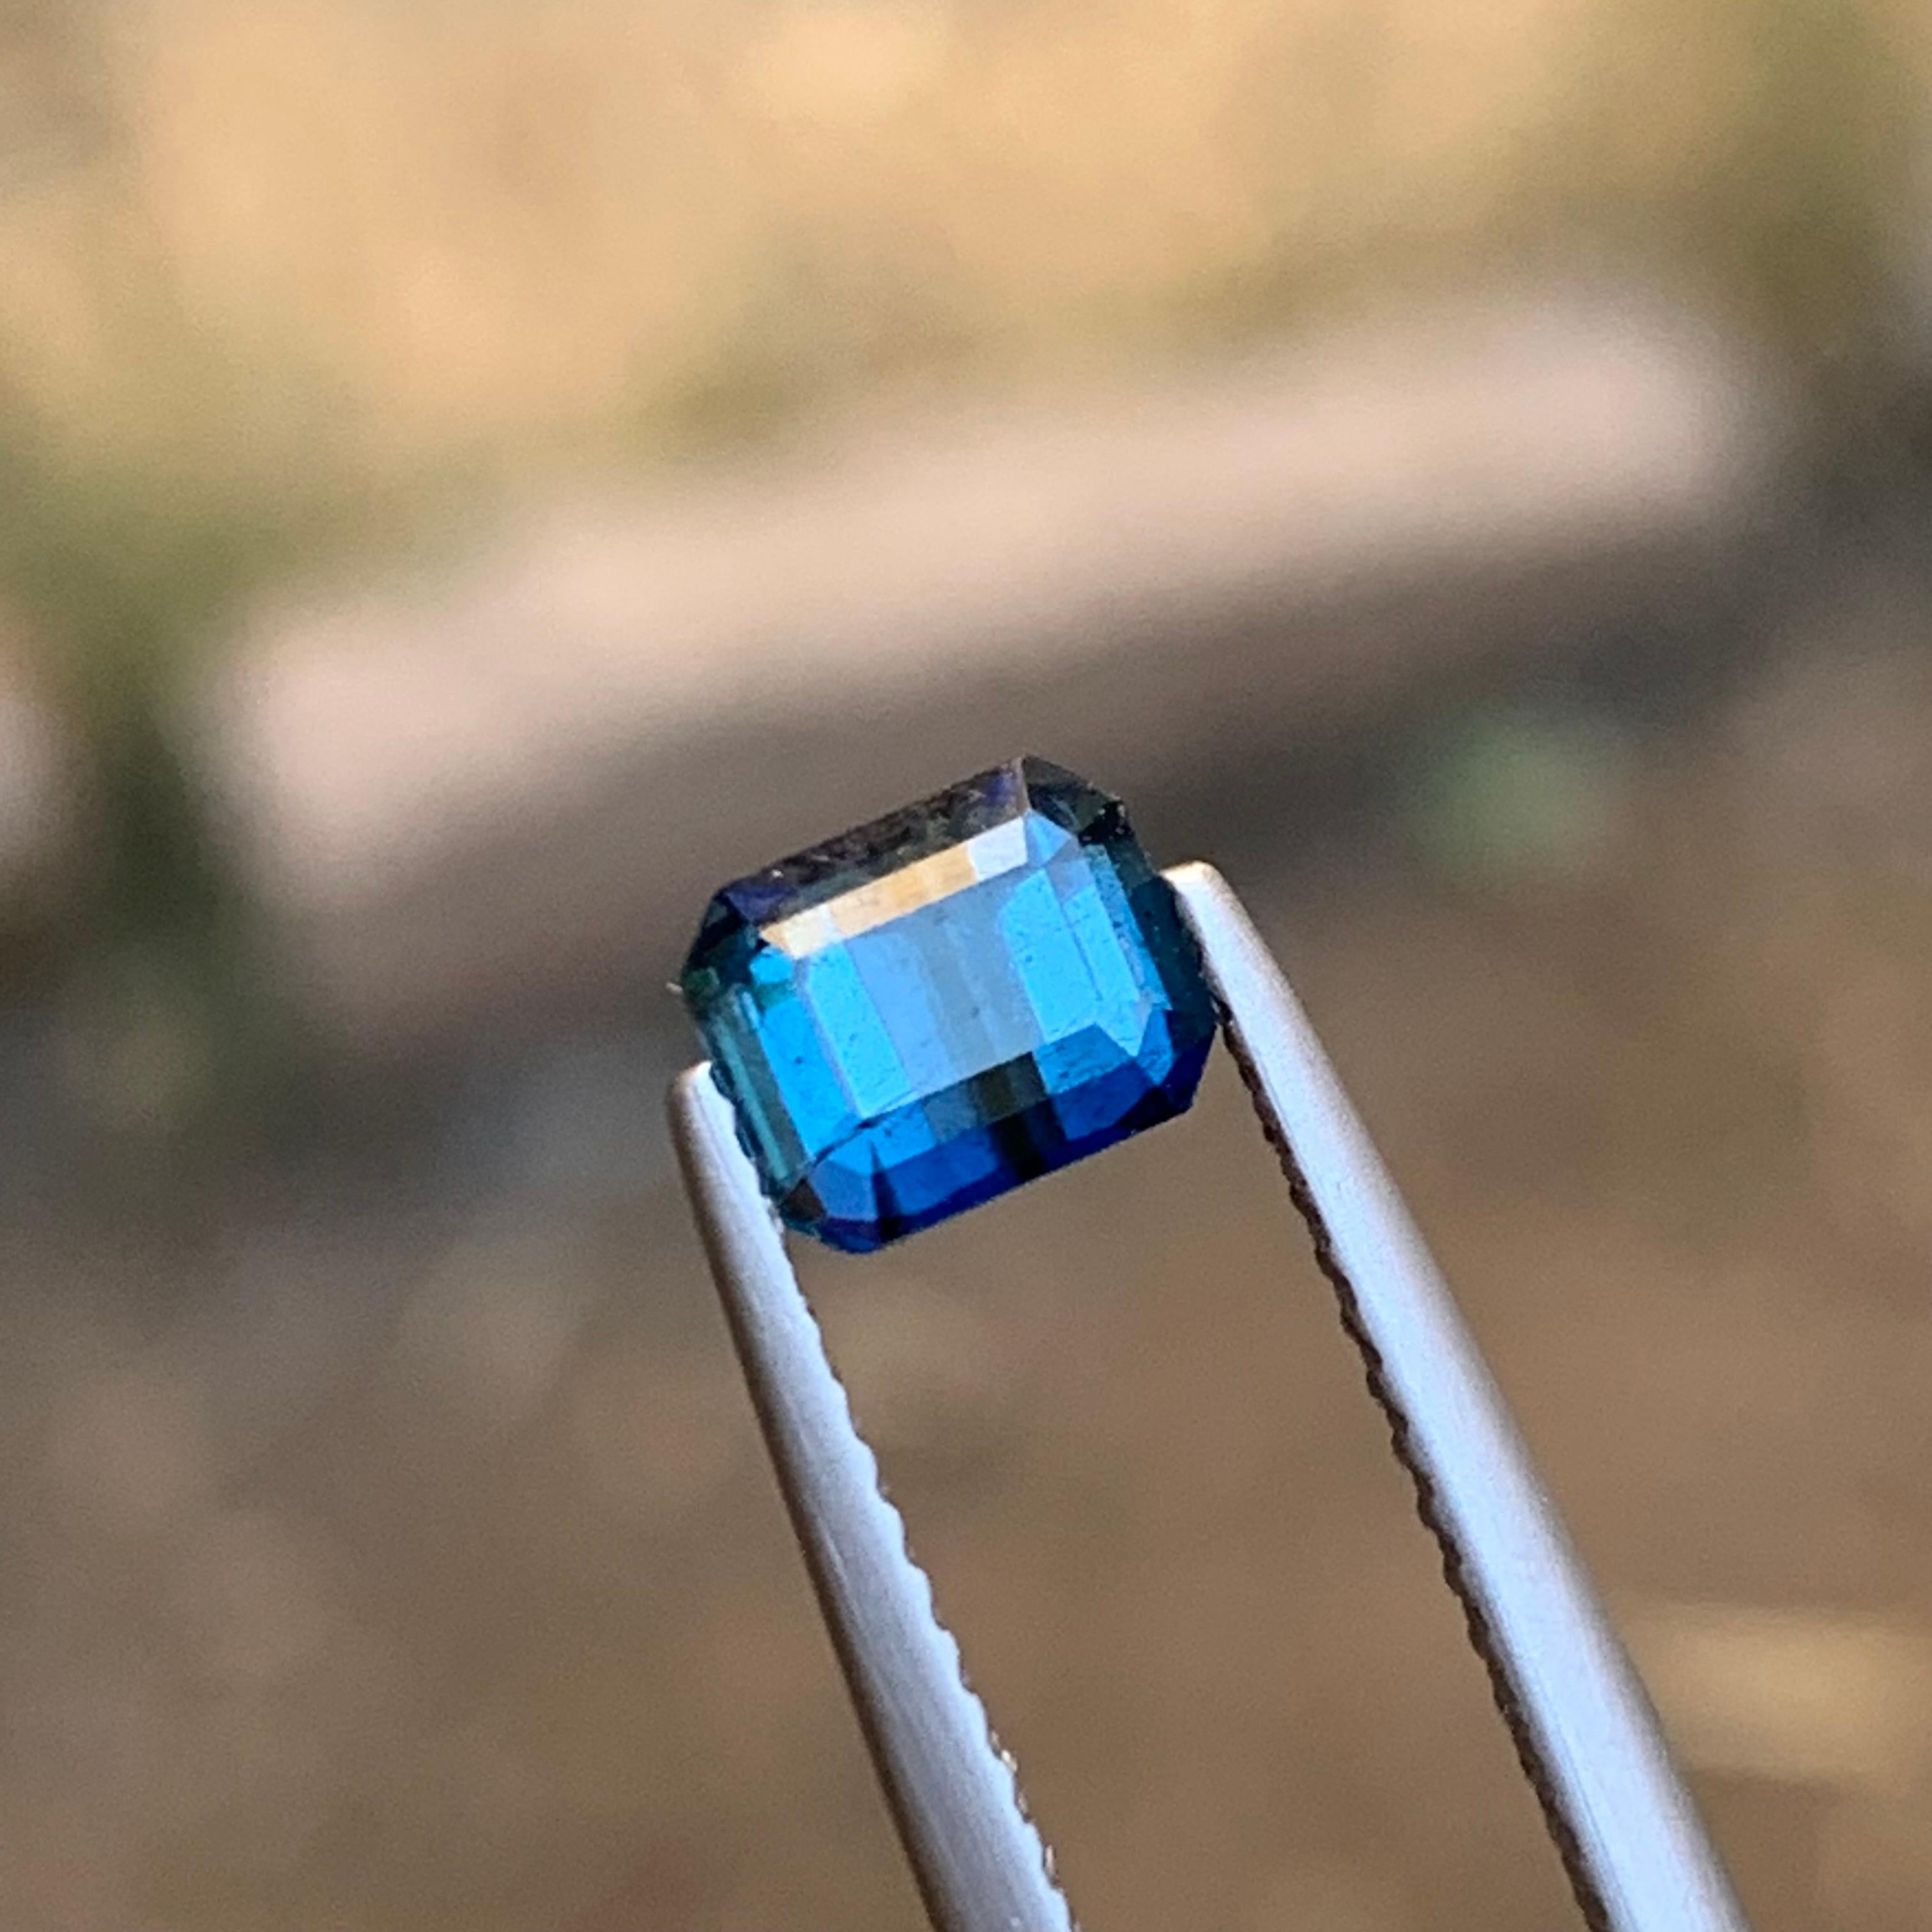 Rare Darkish Inky Blue Natural Tourmaline Gemstone, 1 Ct Emerald Cut for Ring  For Sale 7